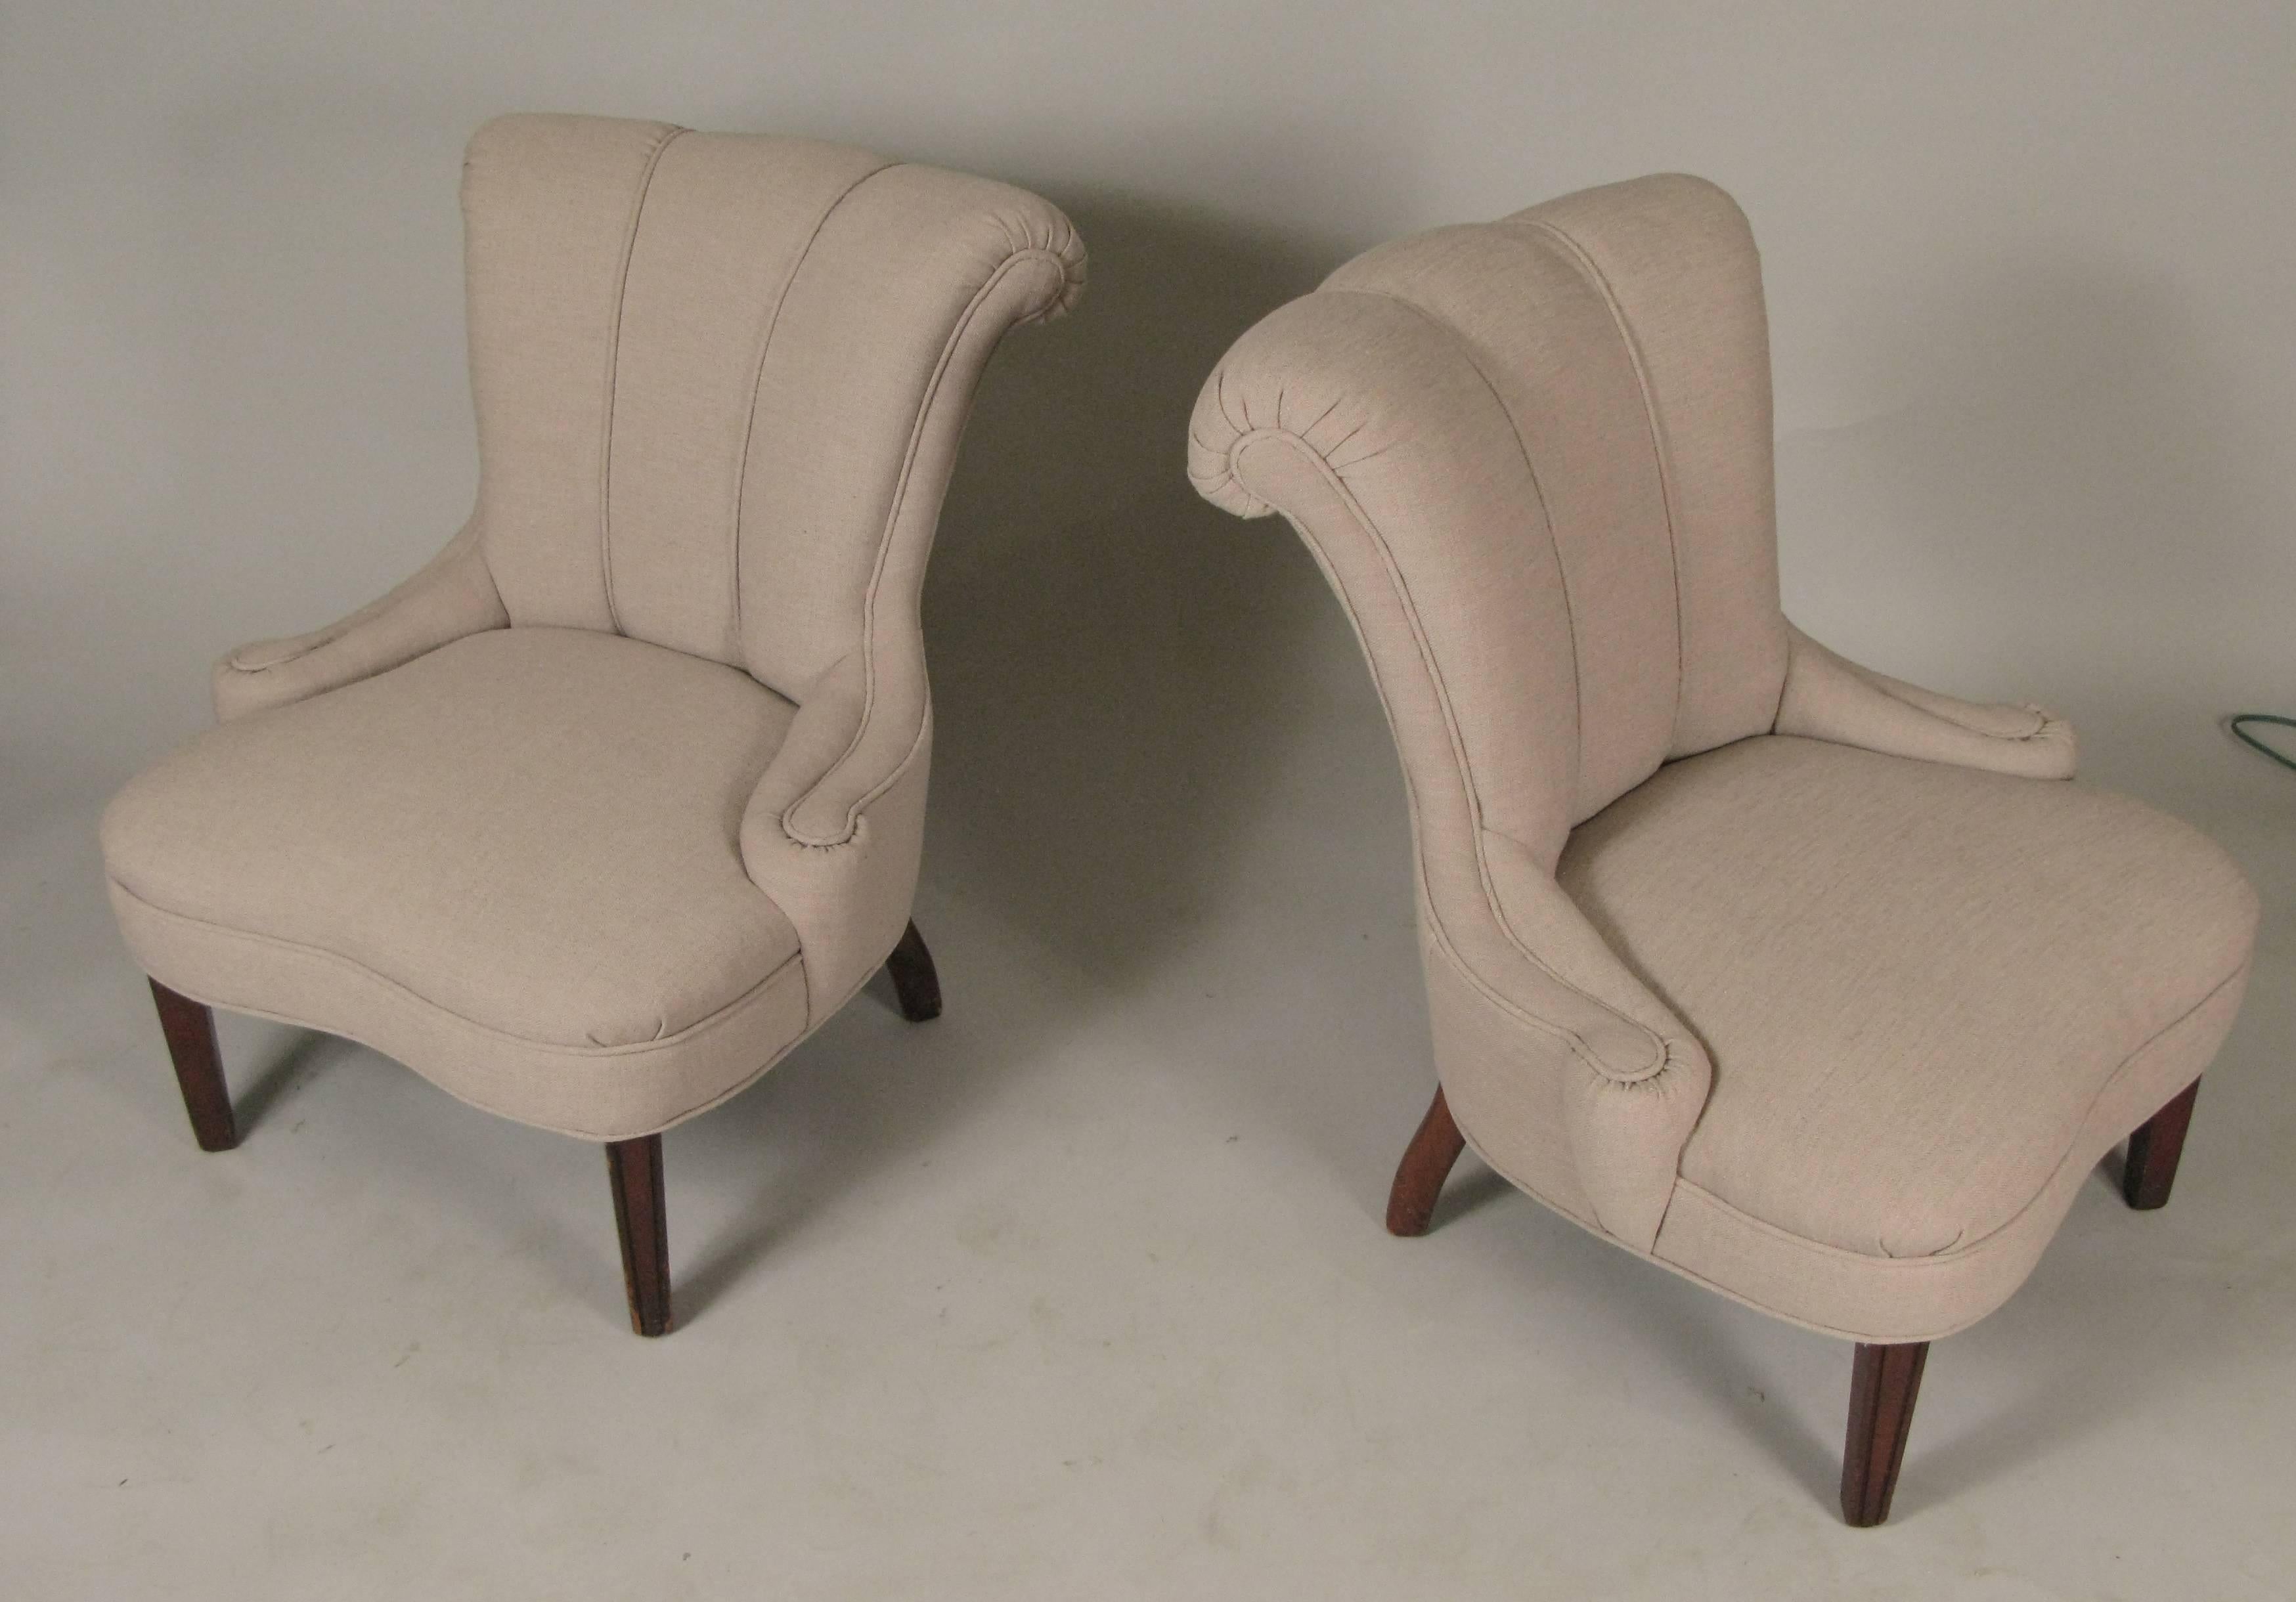 A very charming pair of 1940s slipper chairs with beautiful curved backs with rolled detail at the top and raised on mahogany legs. graceful lines and just expertly reupholstered in a very nice beige textured fabric.